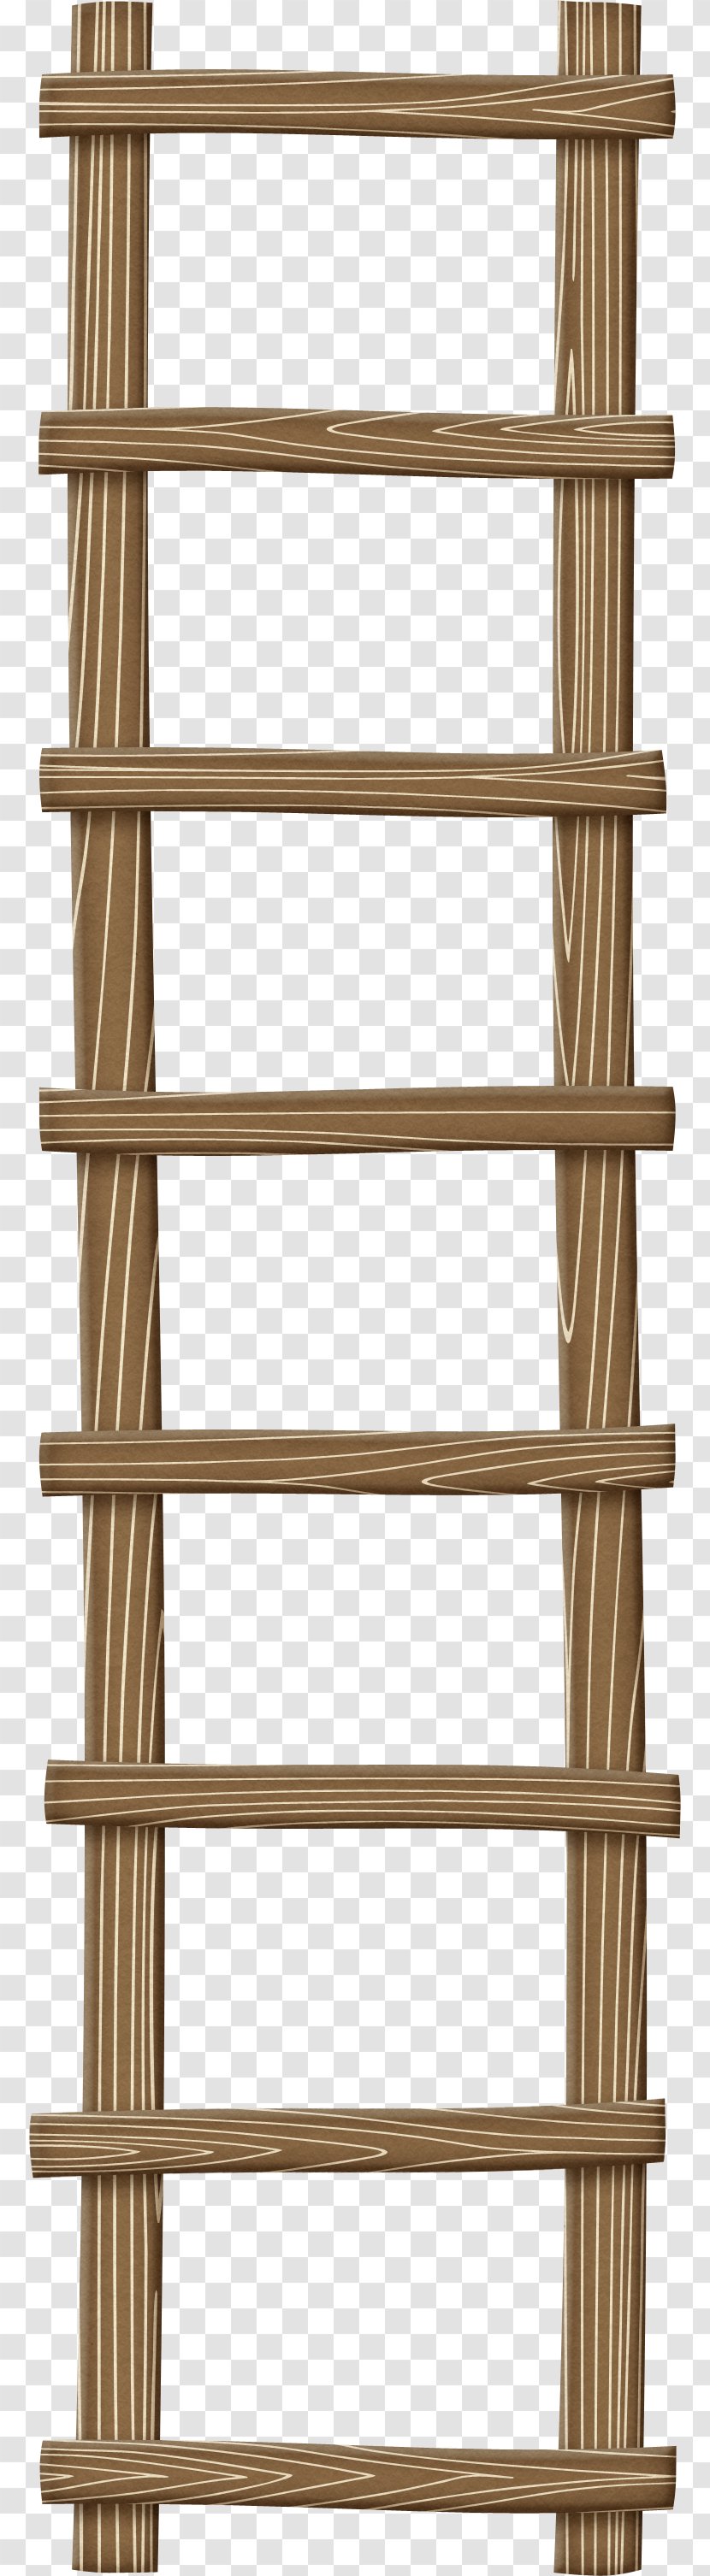 Stairs Ladder Stair Riser Icon - Structure - Wood Transparent PNG